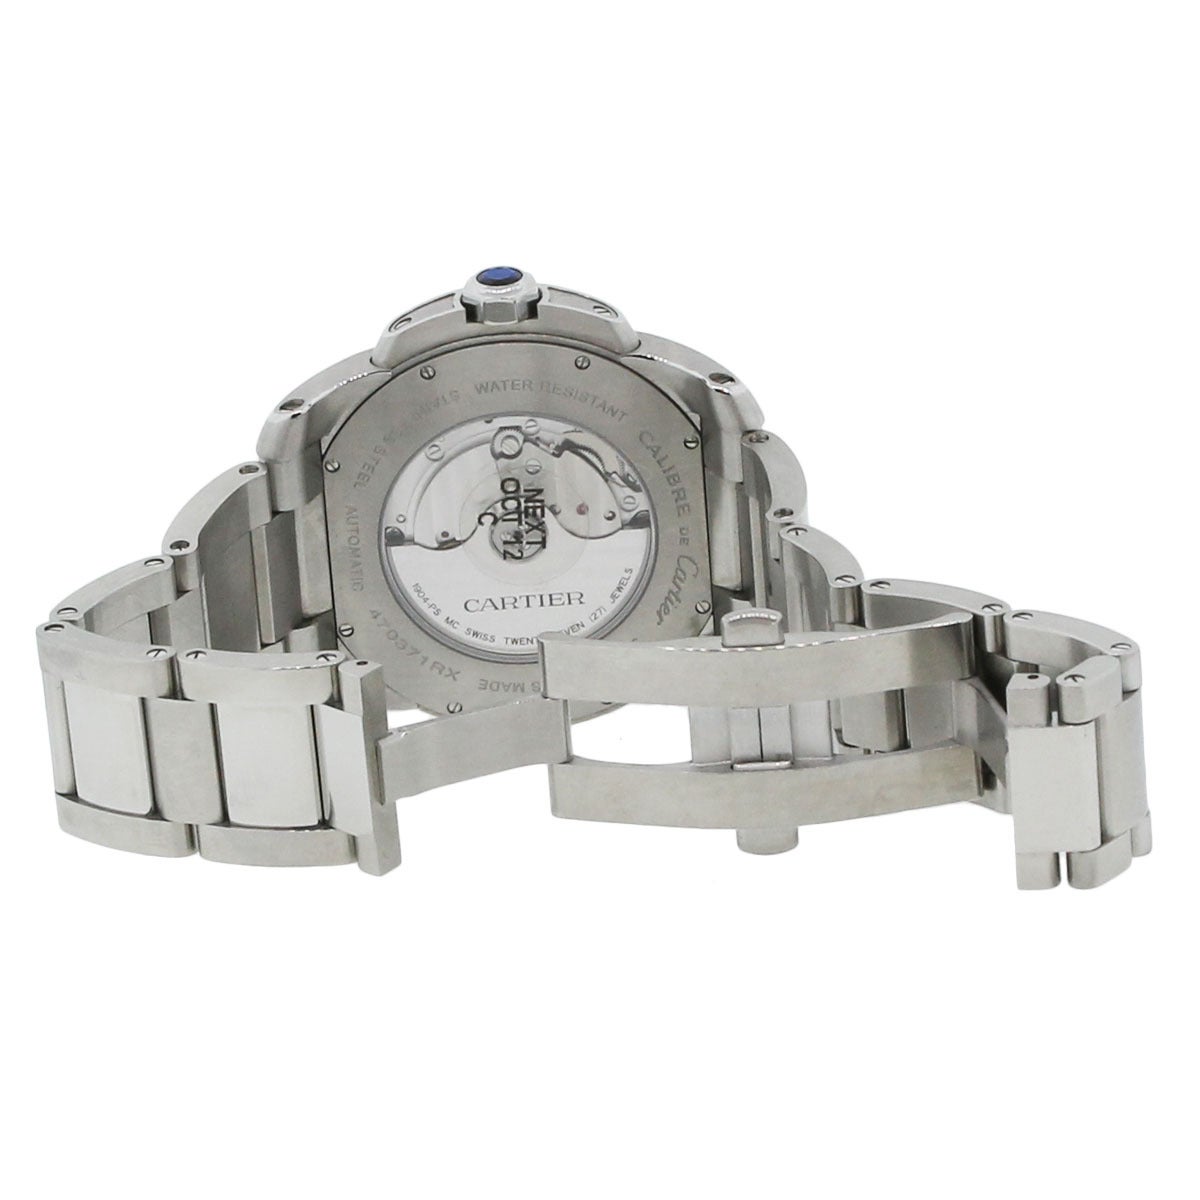 Cartier Stainless Steel Calibre Chronograph Wristwatch Ref 3389 1